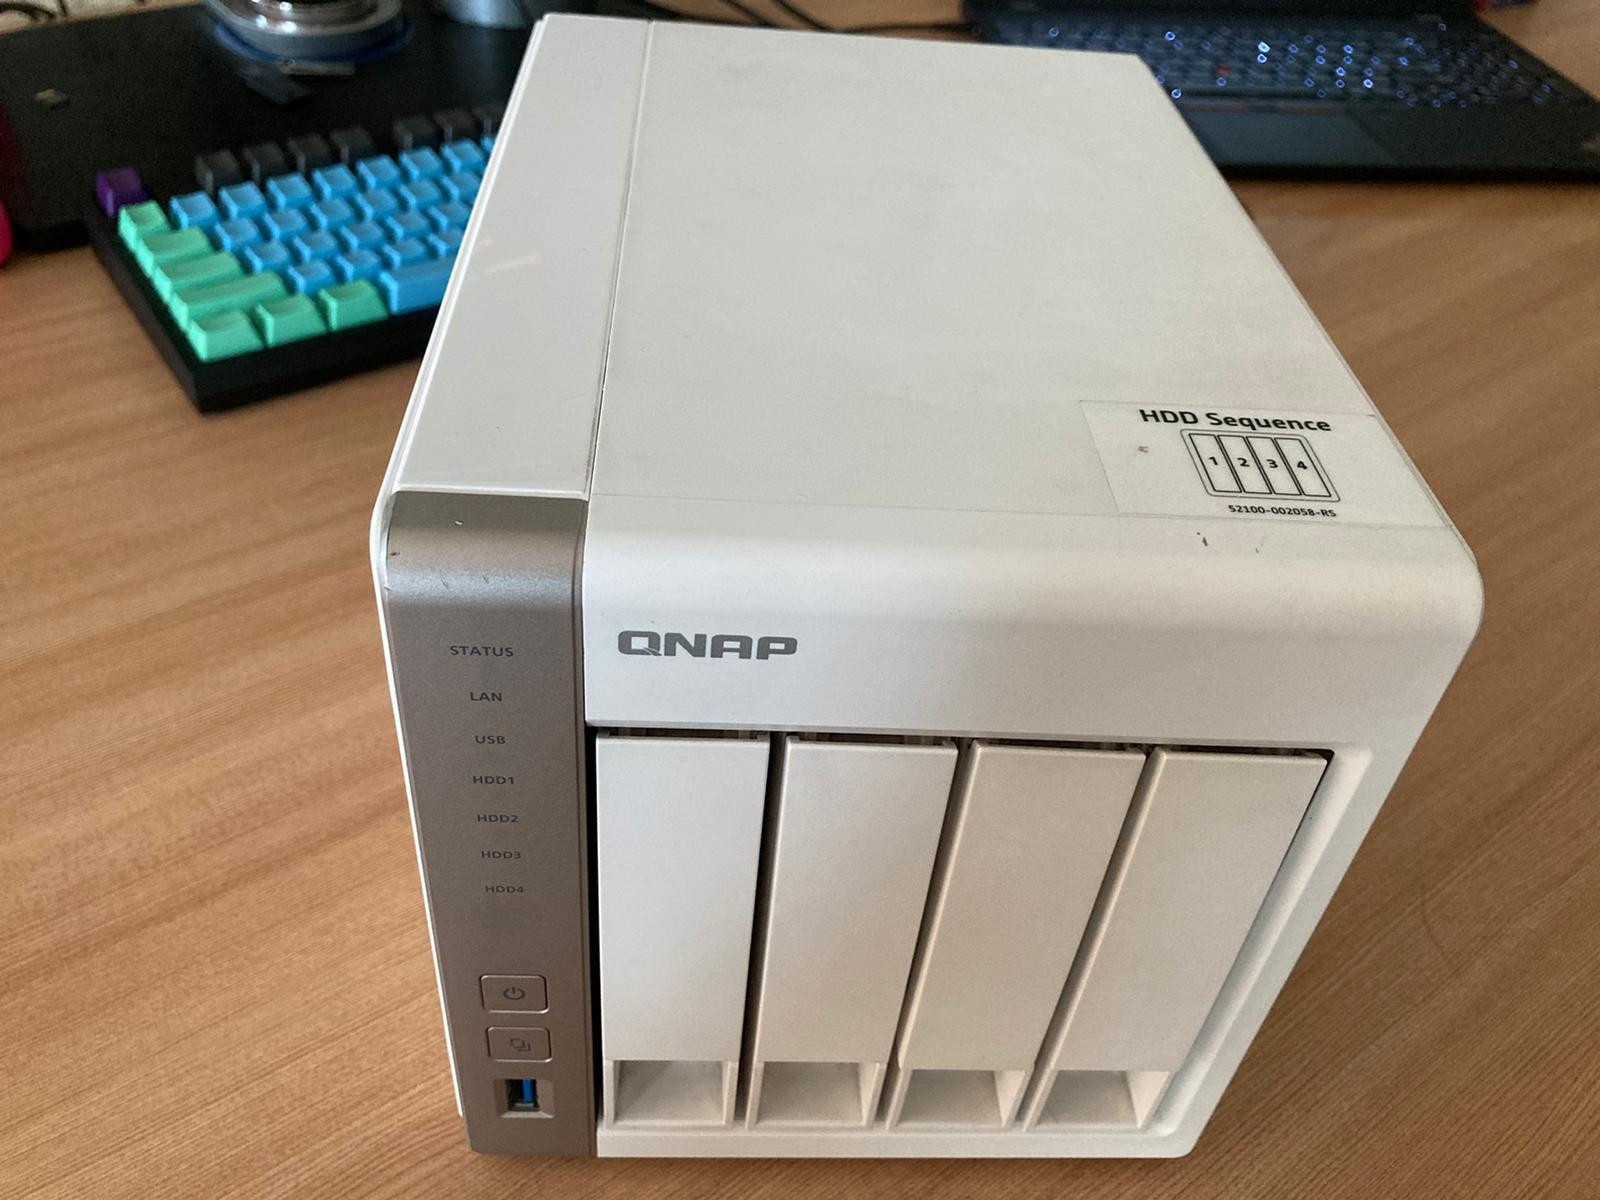 A picture of the QNAP on a wooden desk